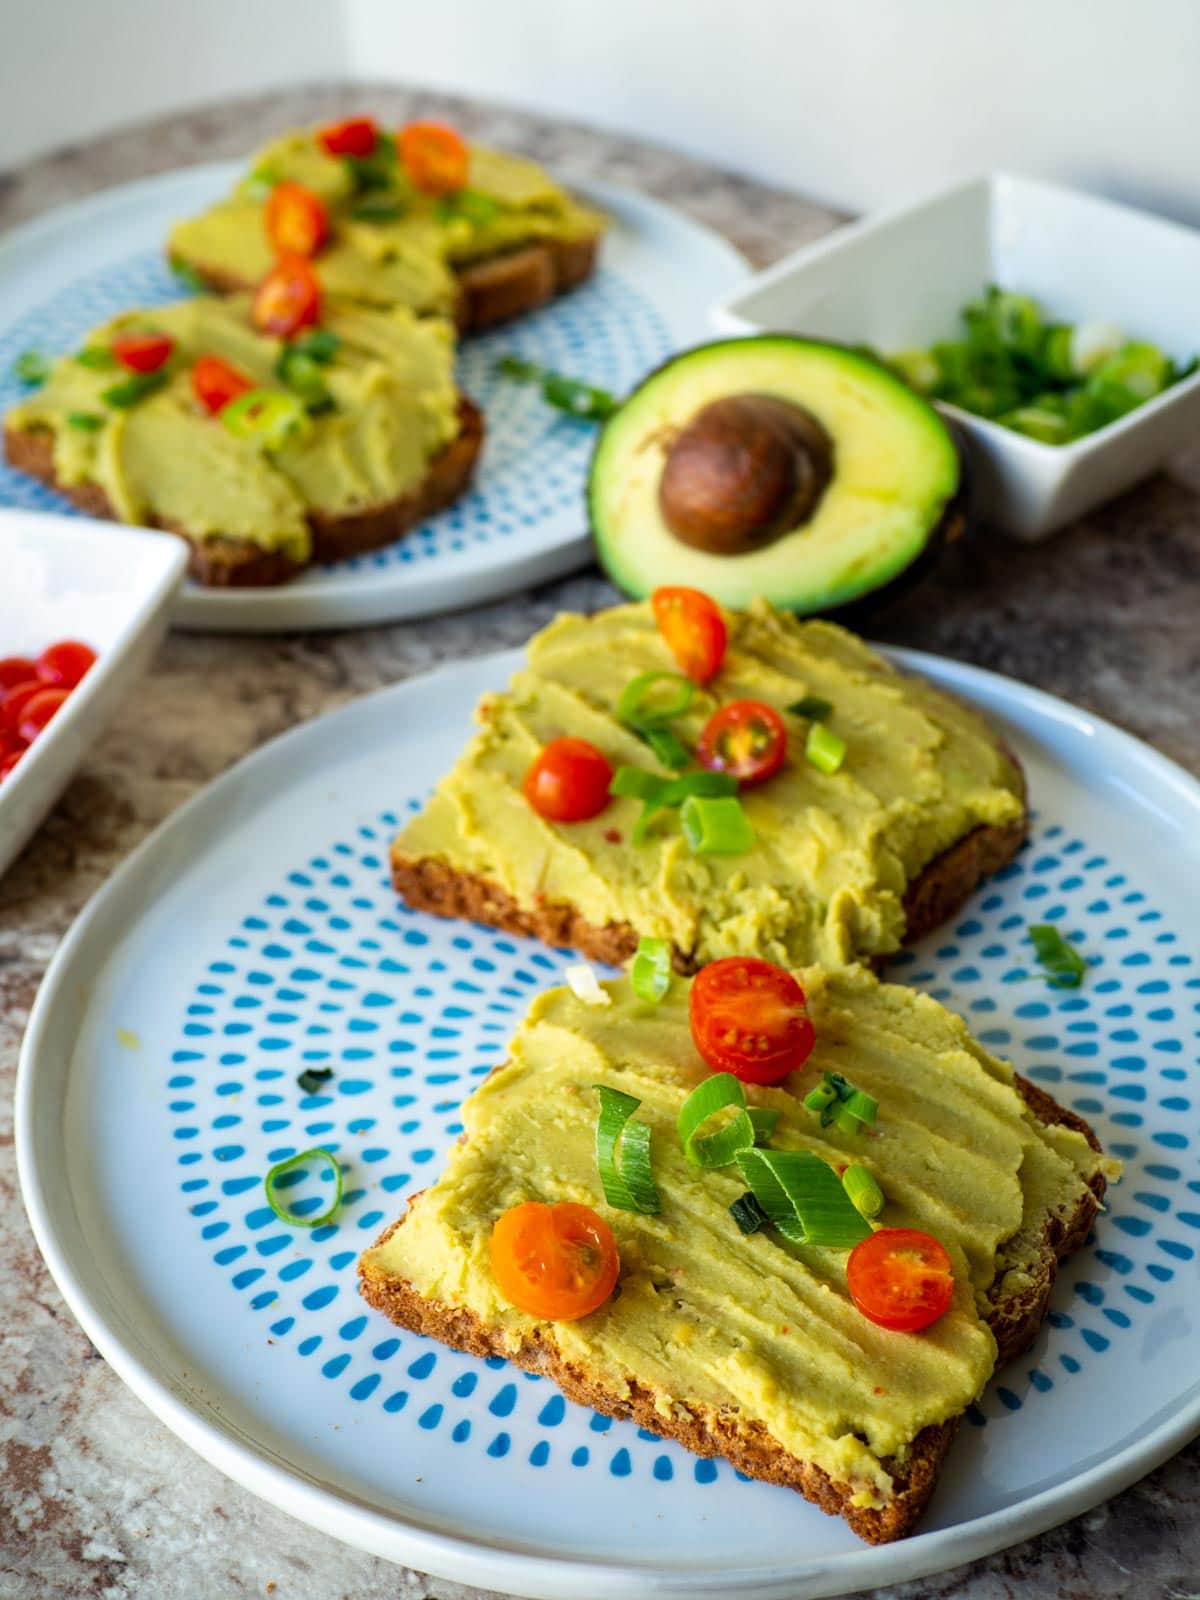 Smooth avocado chickpea mixture spread on toast and topped with tomatoes and green onions.